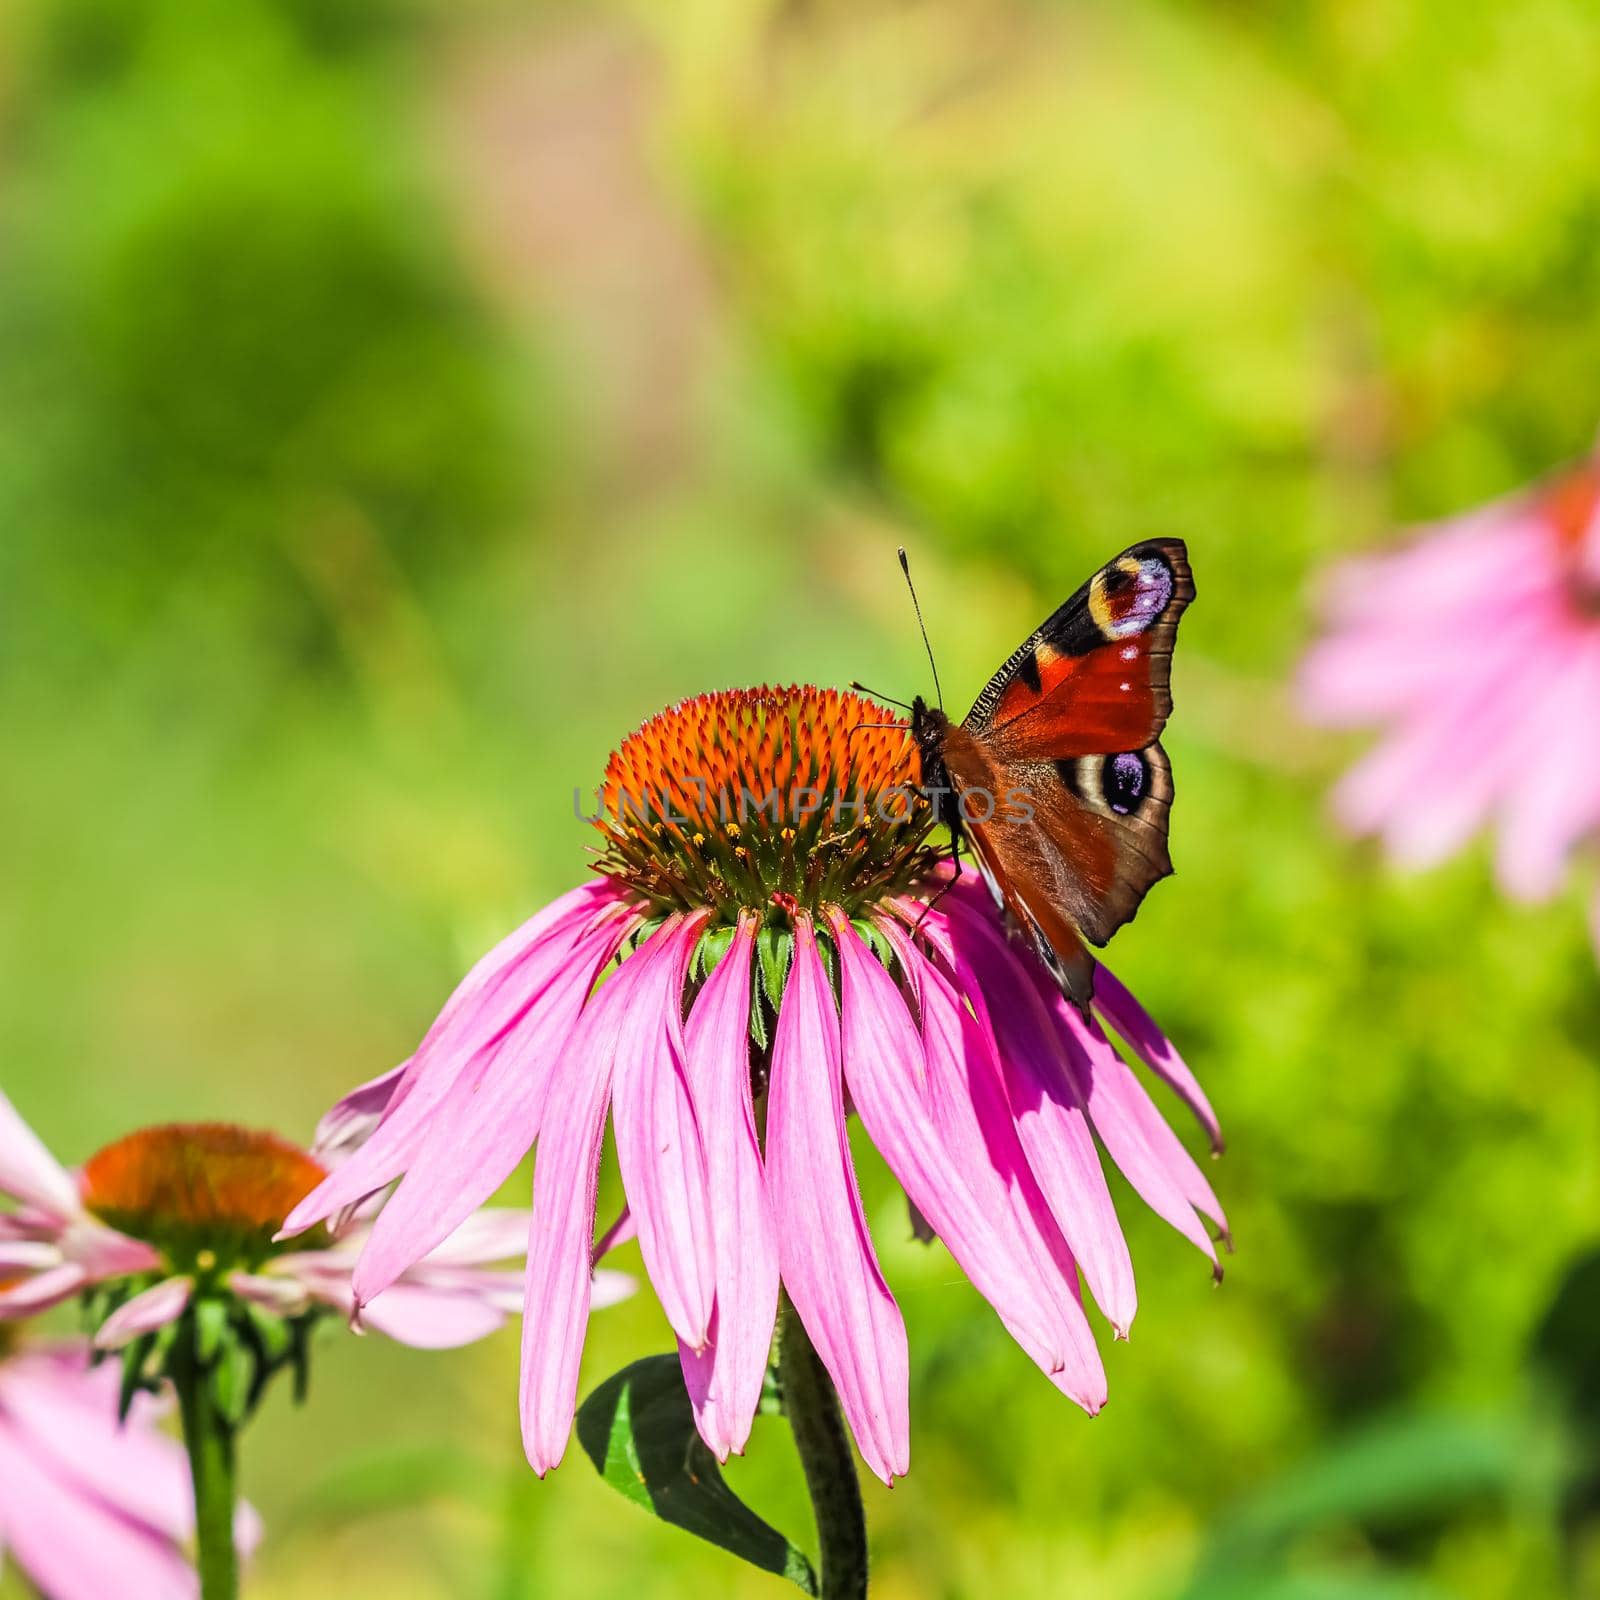 Beautiful colored European Peacock butterfly on purple flower Echinacea in sunny garden. by Olayola